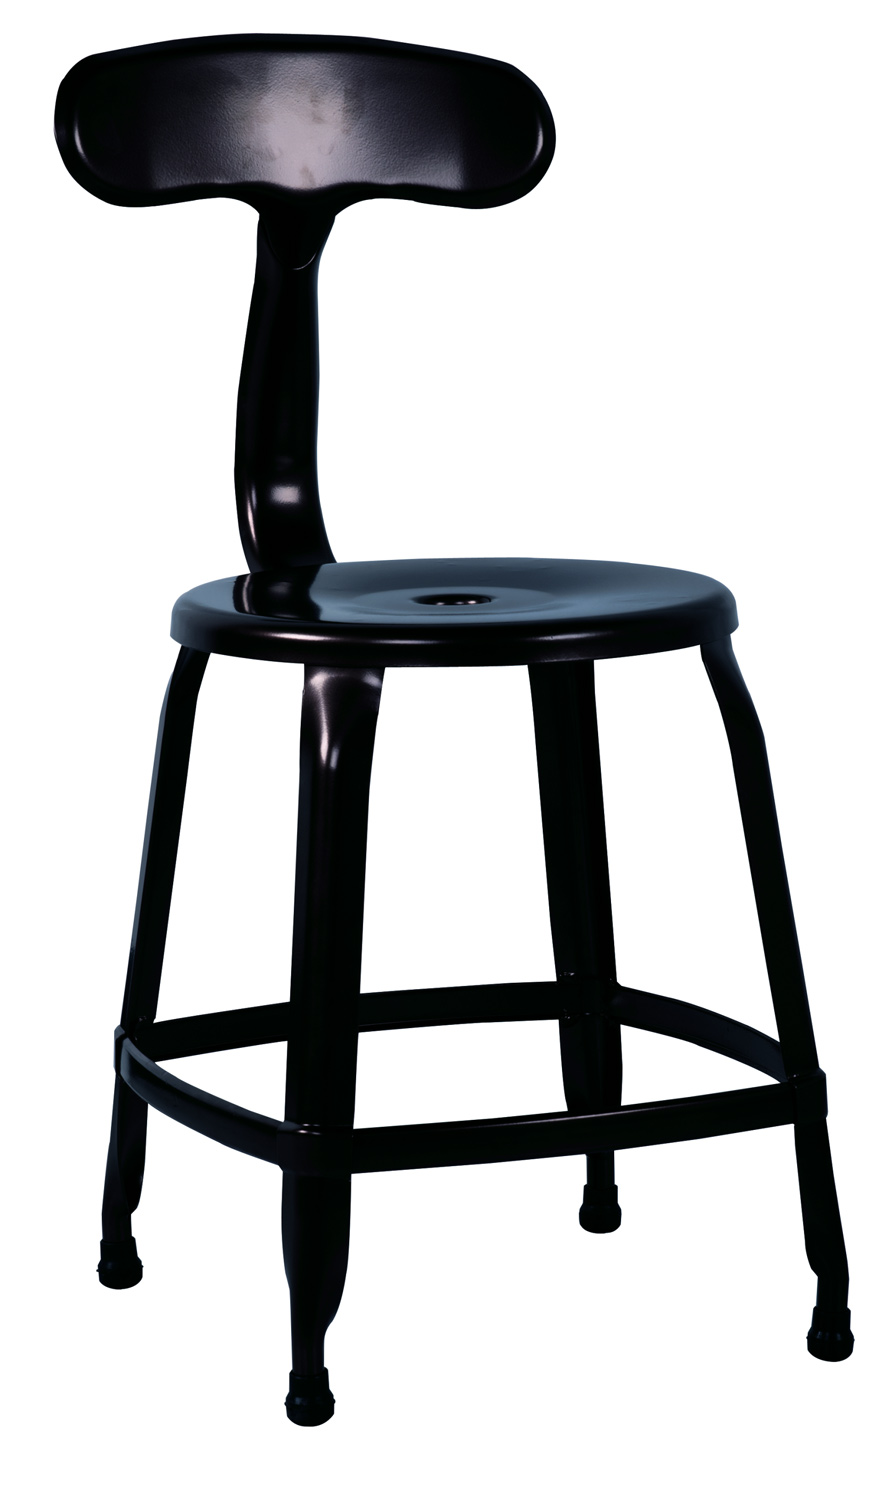 Chintaly Imports 8036 Galvanized Steel Side Chair - Black